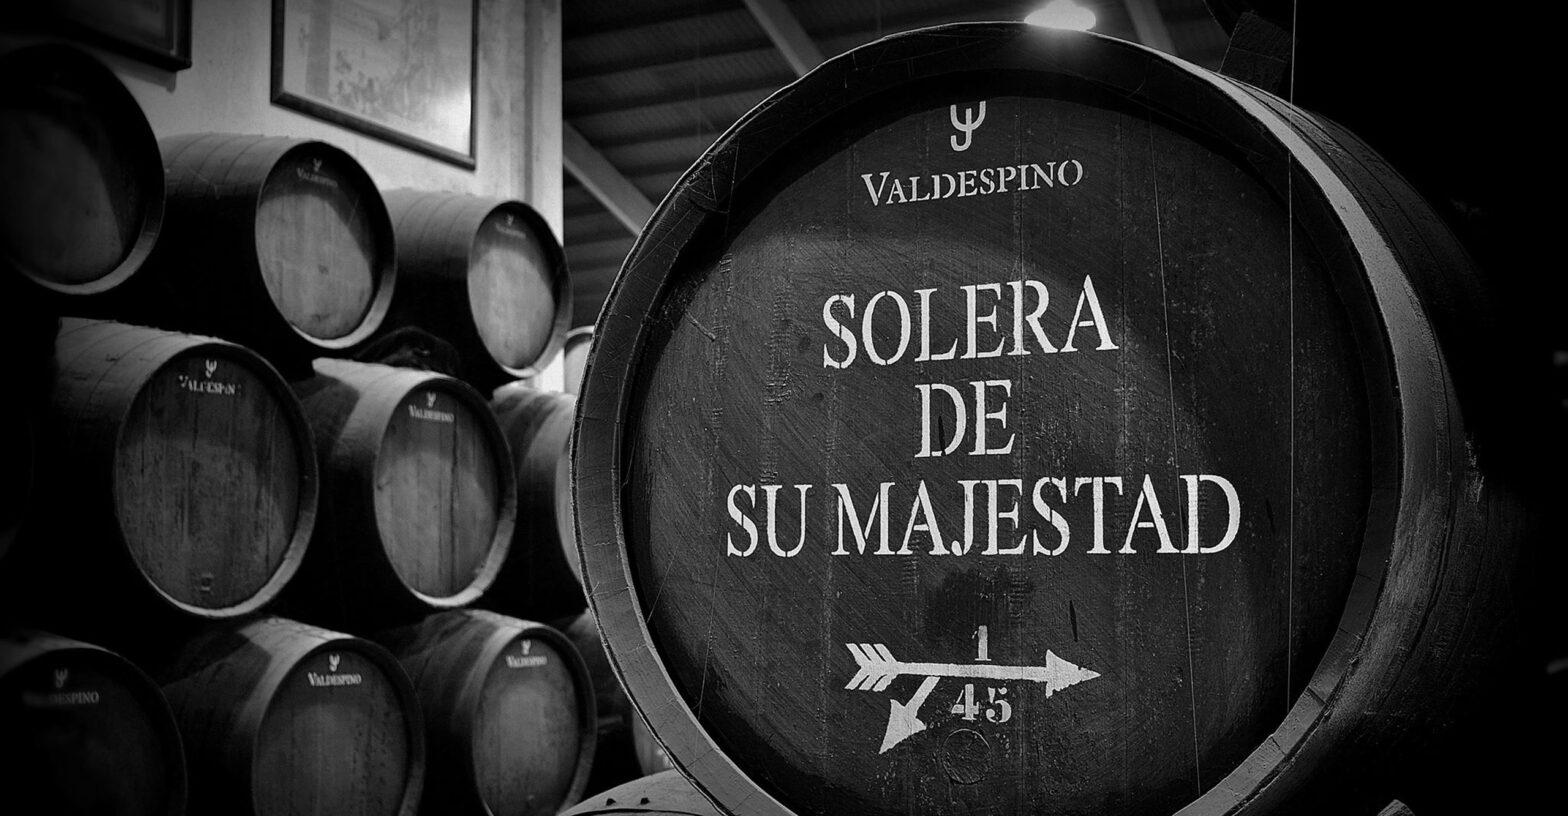 how did sherry get its name and where does the word sherry come from